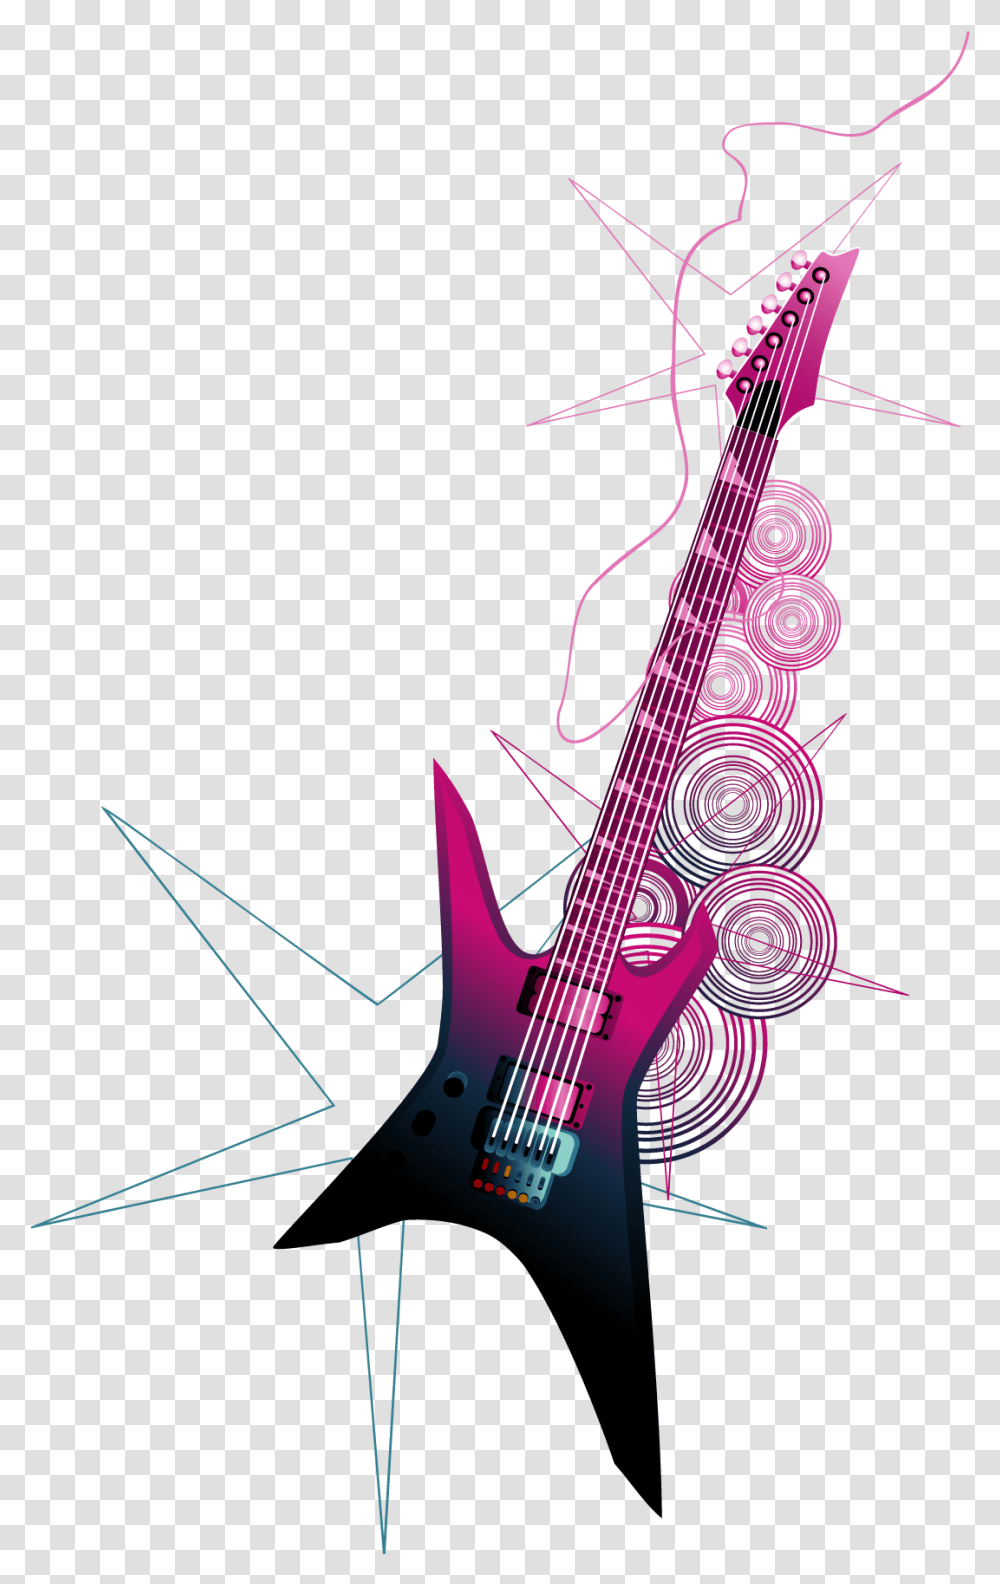 Vector Electric Free Download Hd Electric Guitar Vector Pink, Leisure Activities, Musical Instrument, Bass Guitar, Violin Transparent Png